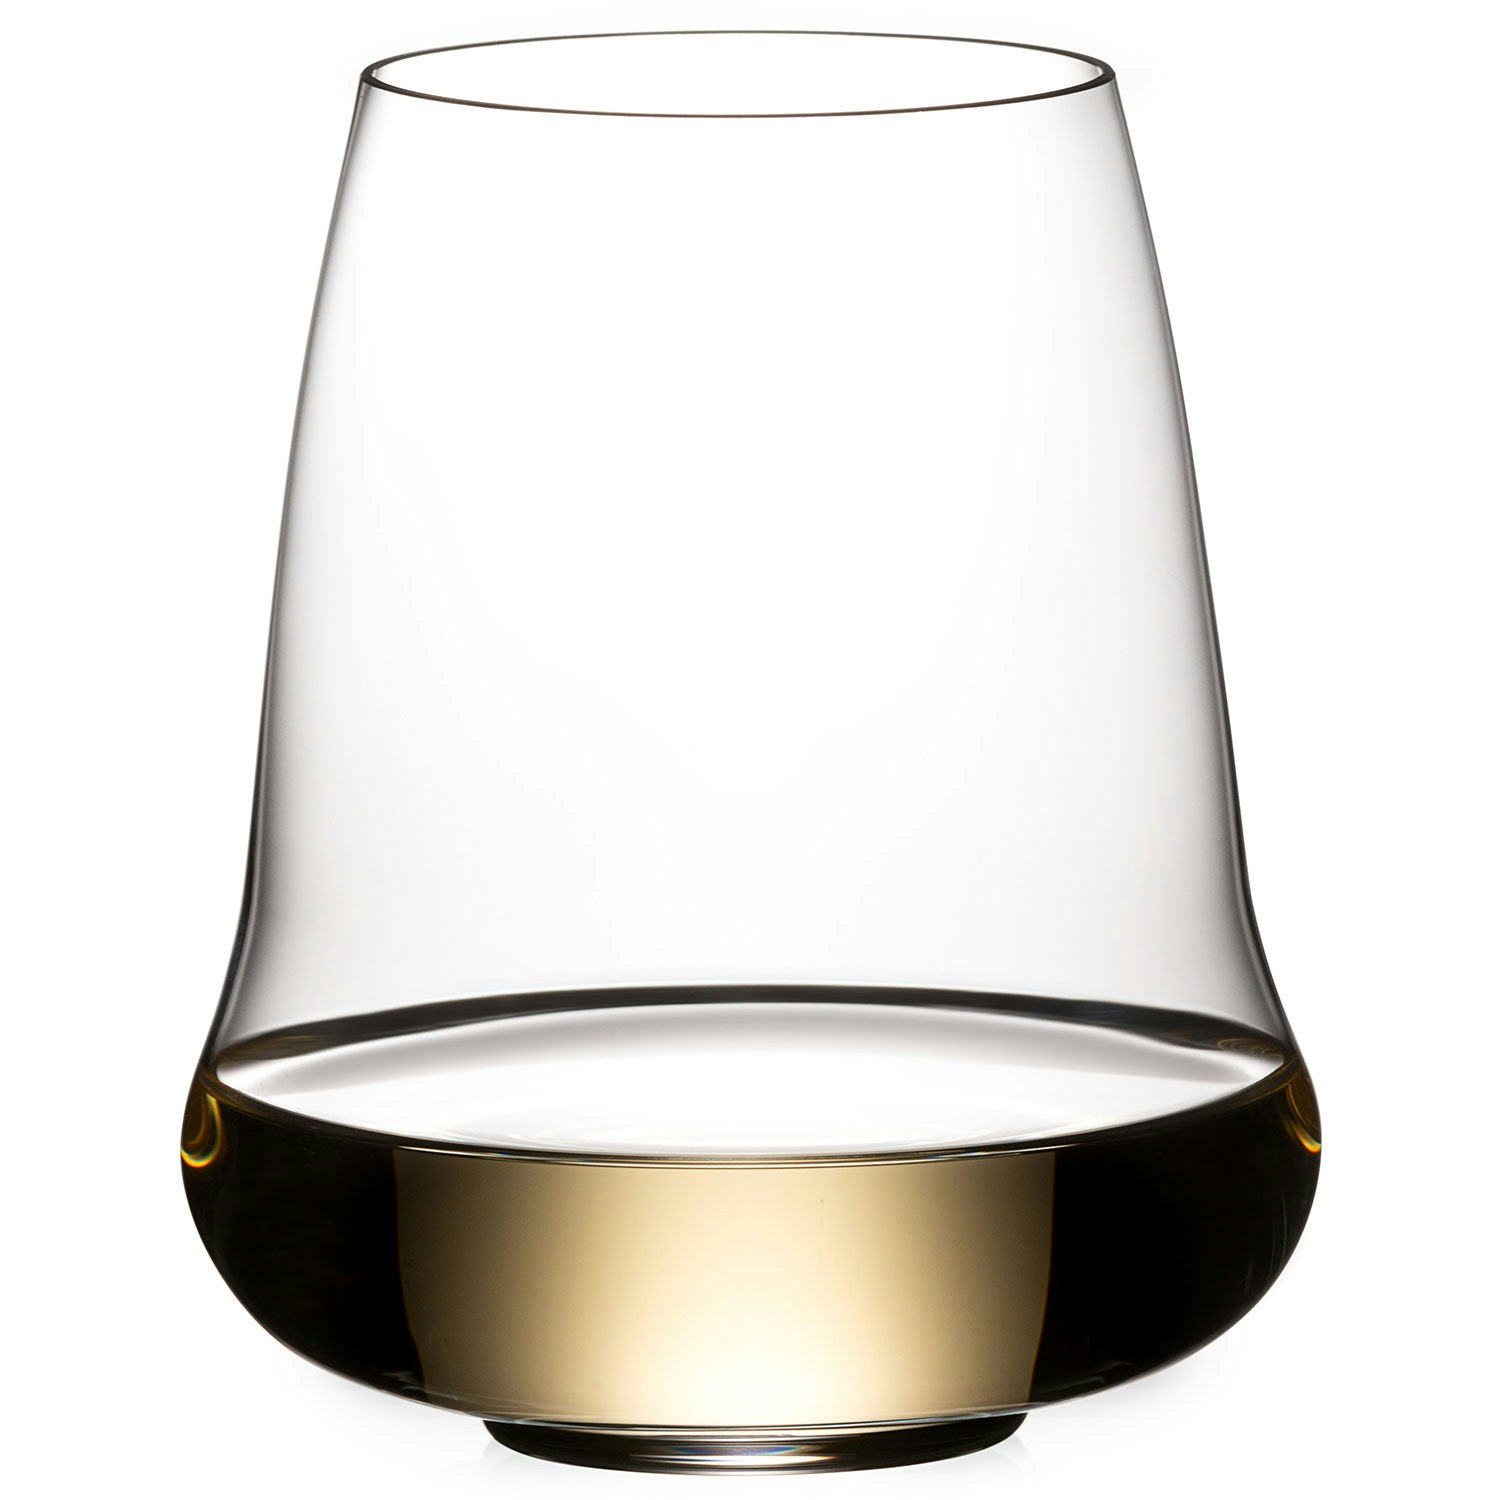 https://royaldesign.com/image/11/riedel-riesling-champagne-2-pack-0